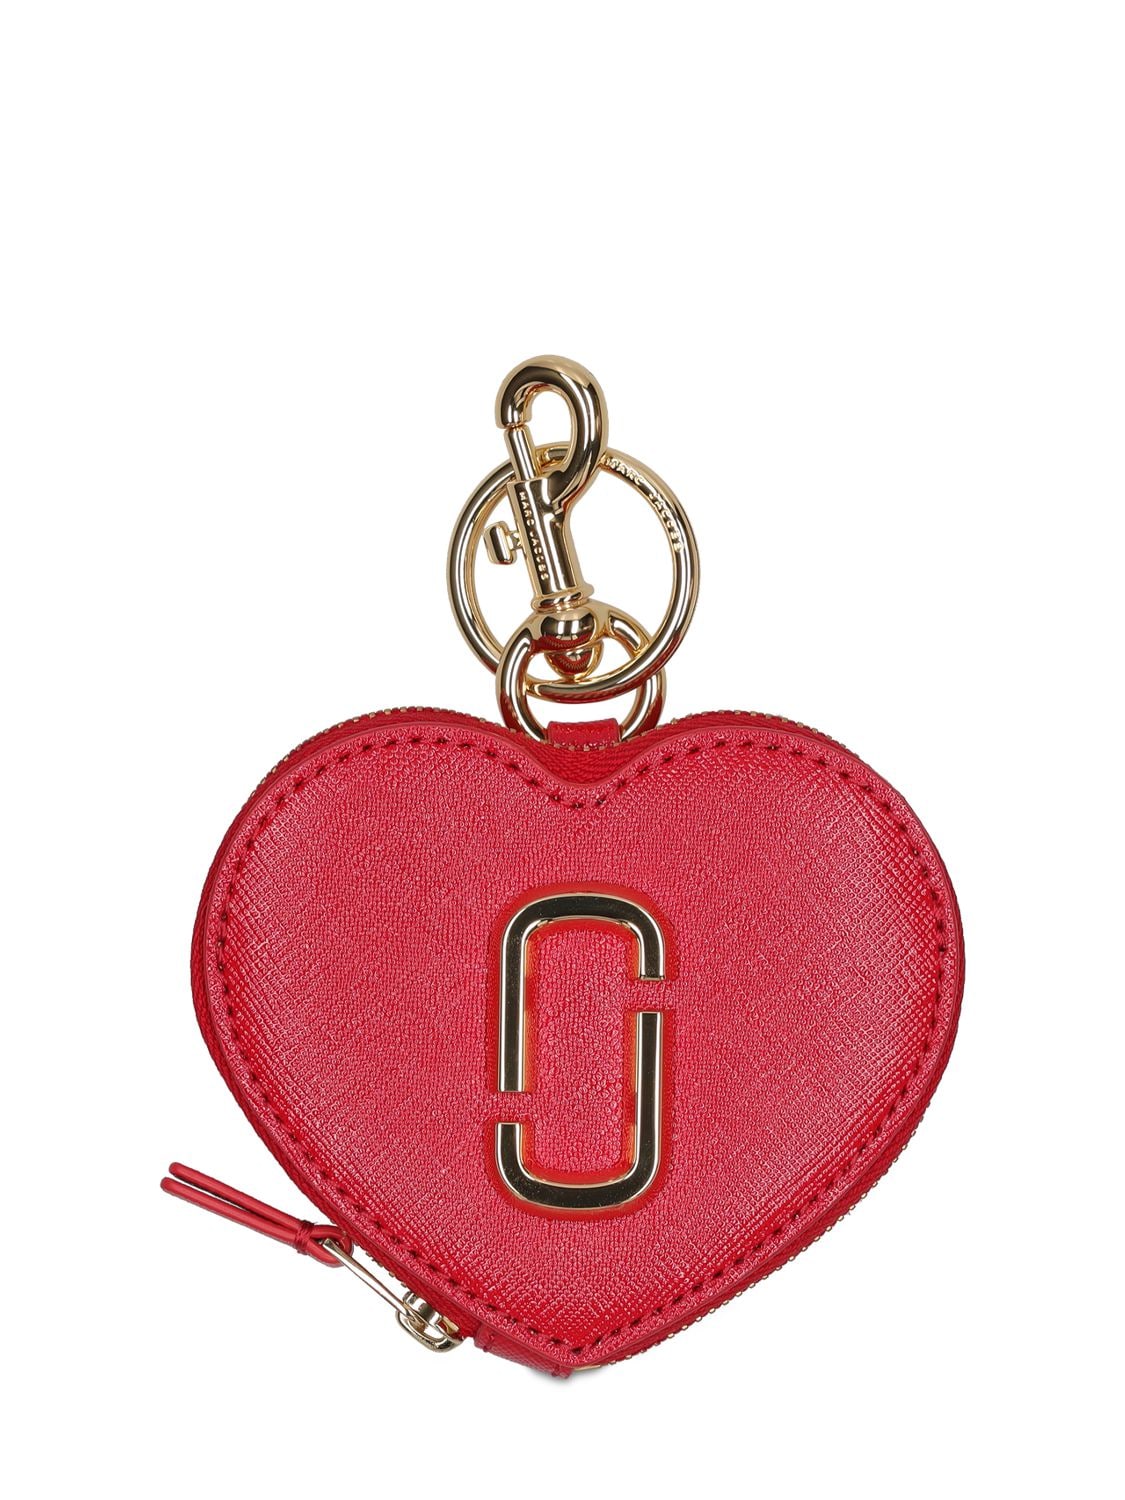 Marc Jacobs The Heart Leather Pouch In True Red